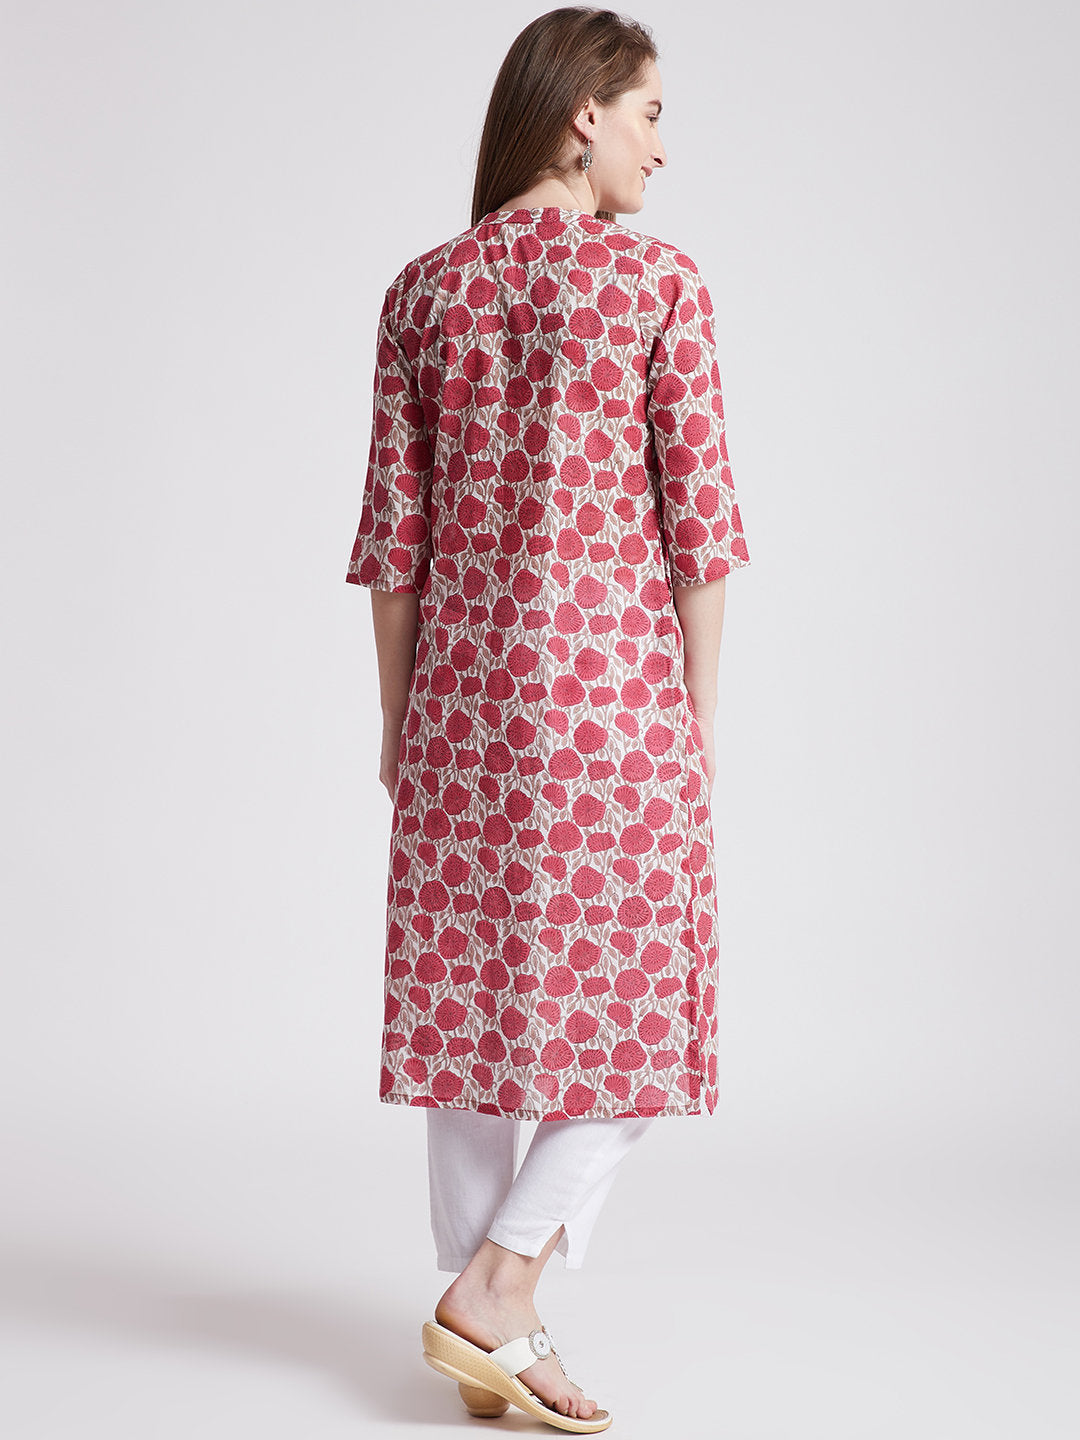 Hand block printed ethnic long Indian kurta in white colour with rose print & front slit